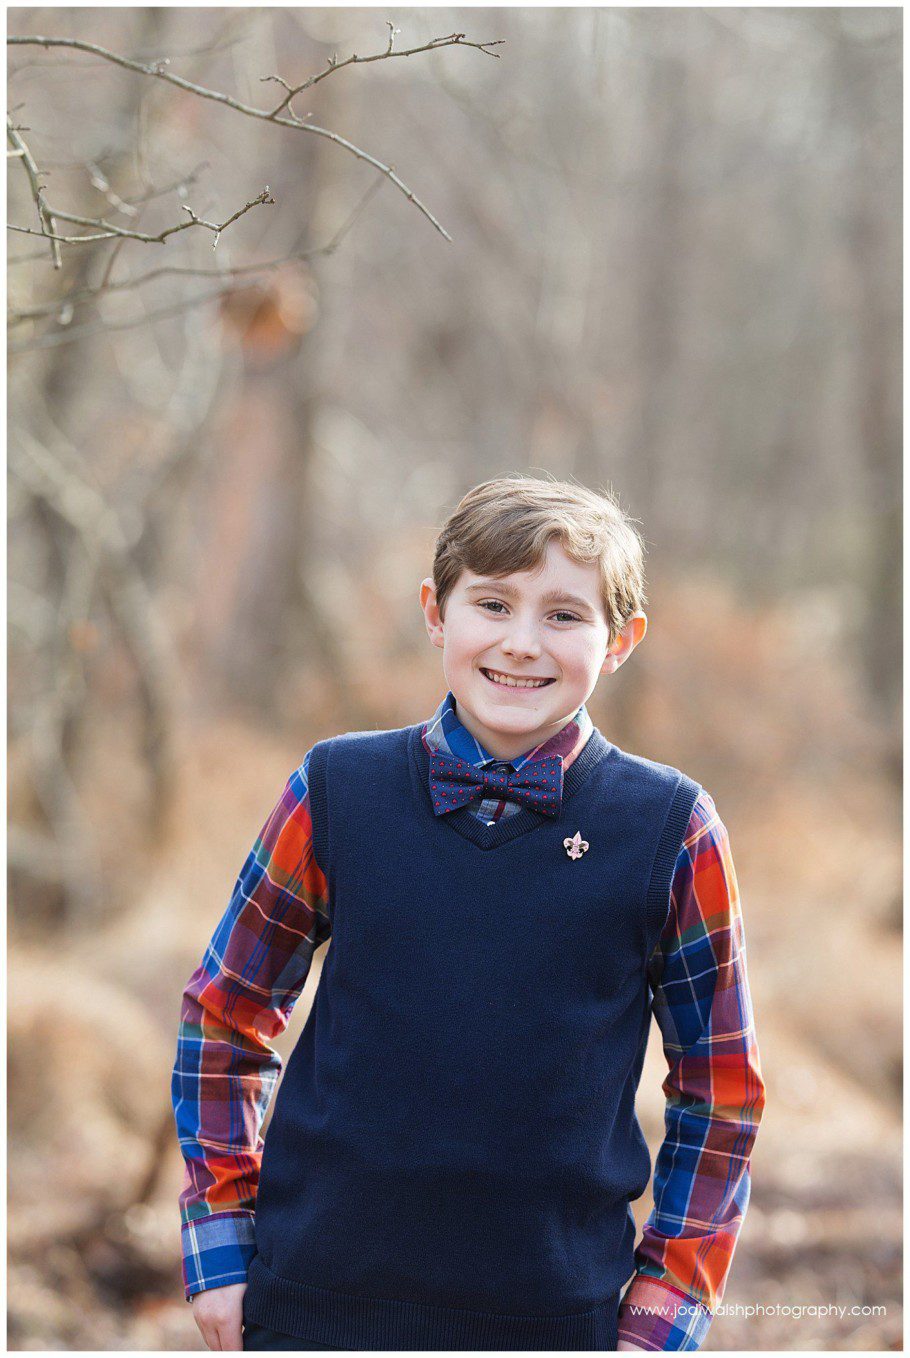 Image of a teen boy wearing a navy sweater vest and bow tie. He's standing in a winter woods with bare trees and tall grasses.